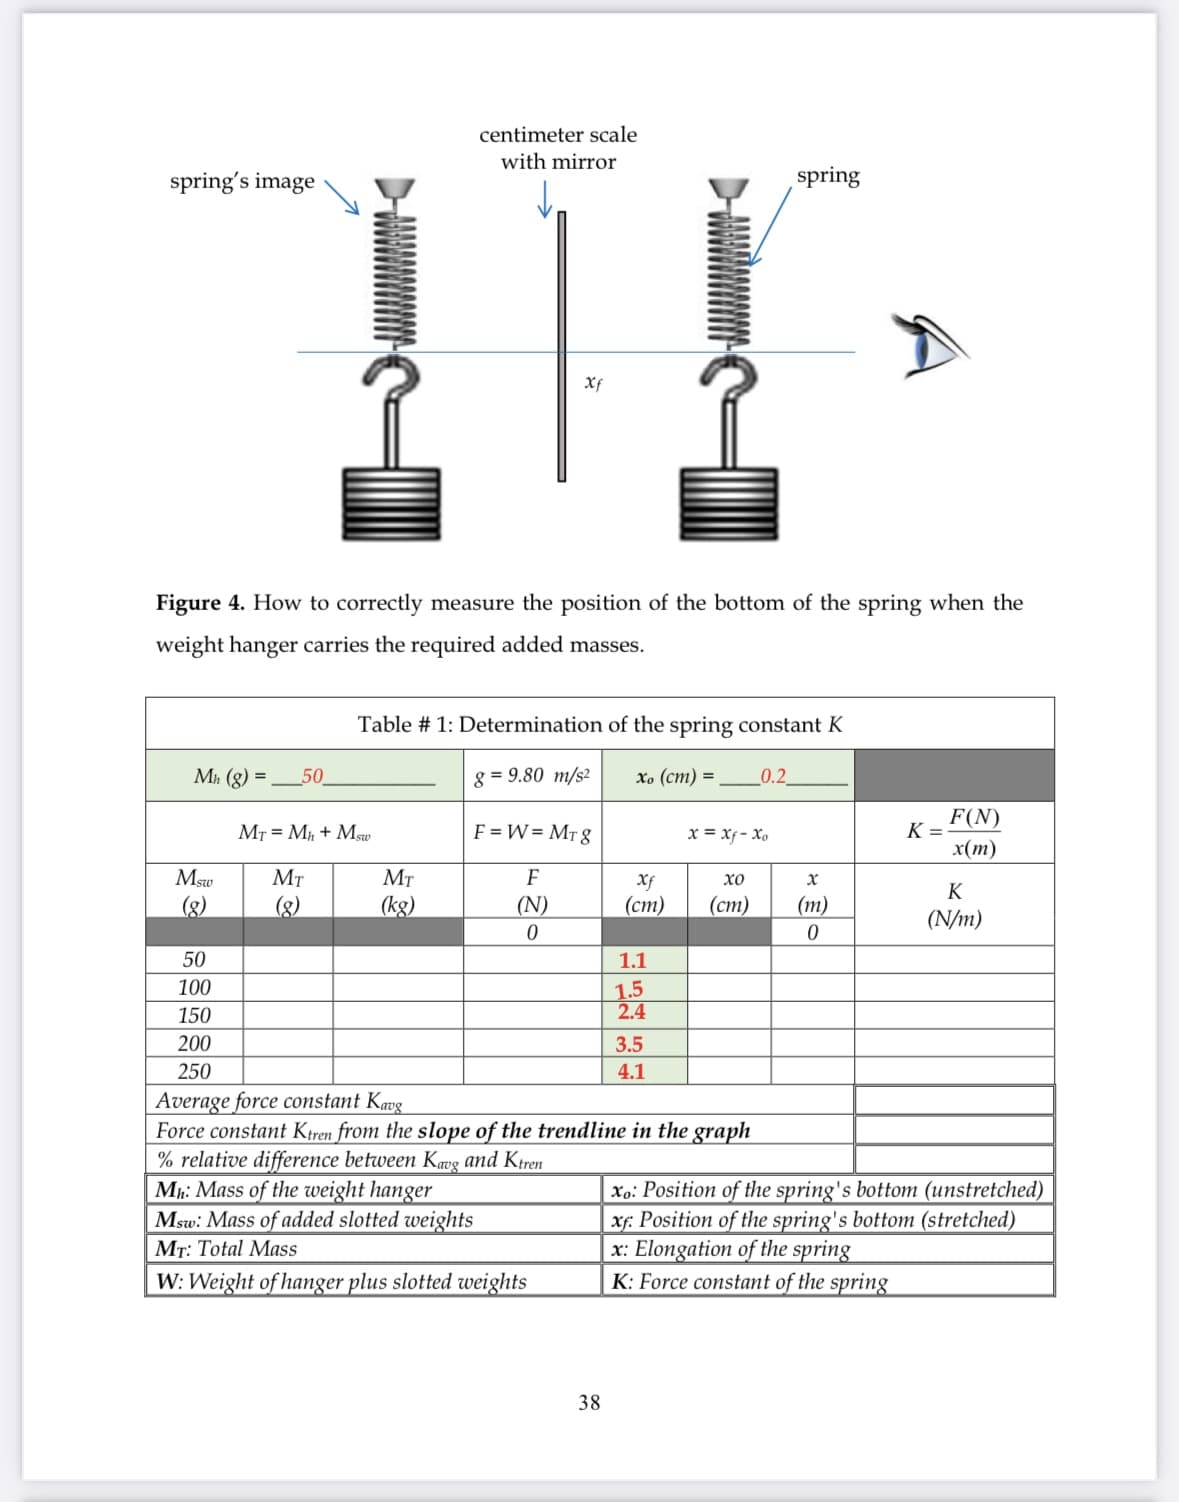 spring's image
centimeter scale
with mirror
Xf
spring
Figure 4. How to correctly measure the position of the bottom of the spring when the
weight hanger carries the required added masses.
Table #1: Determination of the spring constant K
Mh (g)
50
g = 9.80 m/s²
xo (cm) =
0.2
MT=Mh+Msw
F = W = Mrg
x = xf-Xo
K =
F(N)
x(m)
Msw
Мт
Мт
F
Xf
ΧΟ
x
K
(g)
(g)
(kg)
(N)
(cm)
(cm)
(m)
(N/m)
0
0
50
1.1
100
1.5
150
2.4
200
3.5
250
4.1
Average force constant Kavg
Force constant Ktren from the slope of the trendline in the graph
% relative difference between Kavg and Ktren
Mh: Mass of the weight hanger
Msw: Mass of added slotted weights
MT: Total Mass
W: Weight of hanger plus slotted weights
xo: Position of the spring's bottom (unstretched)
xf: Position of the spring's bottom (stretched)
x: Elongation of the spring
K: Force constant of the spring
38